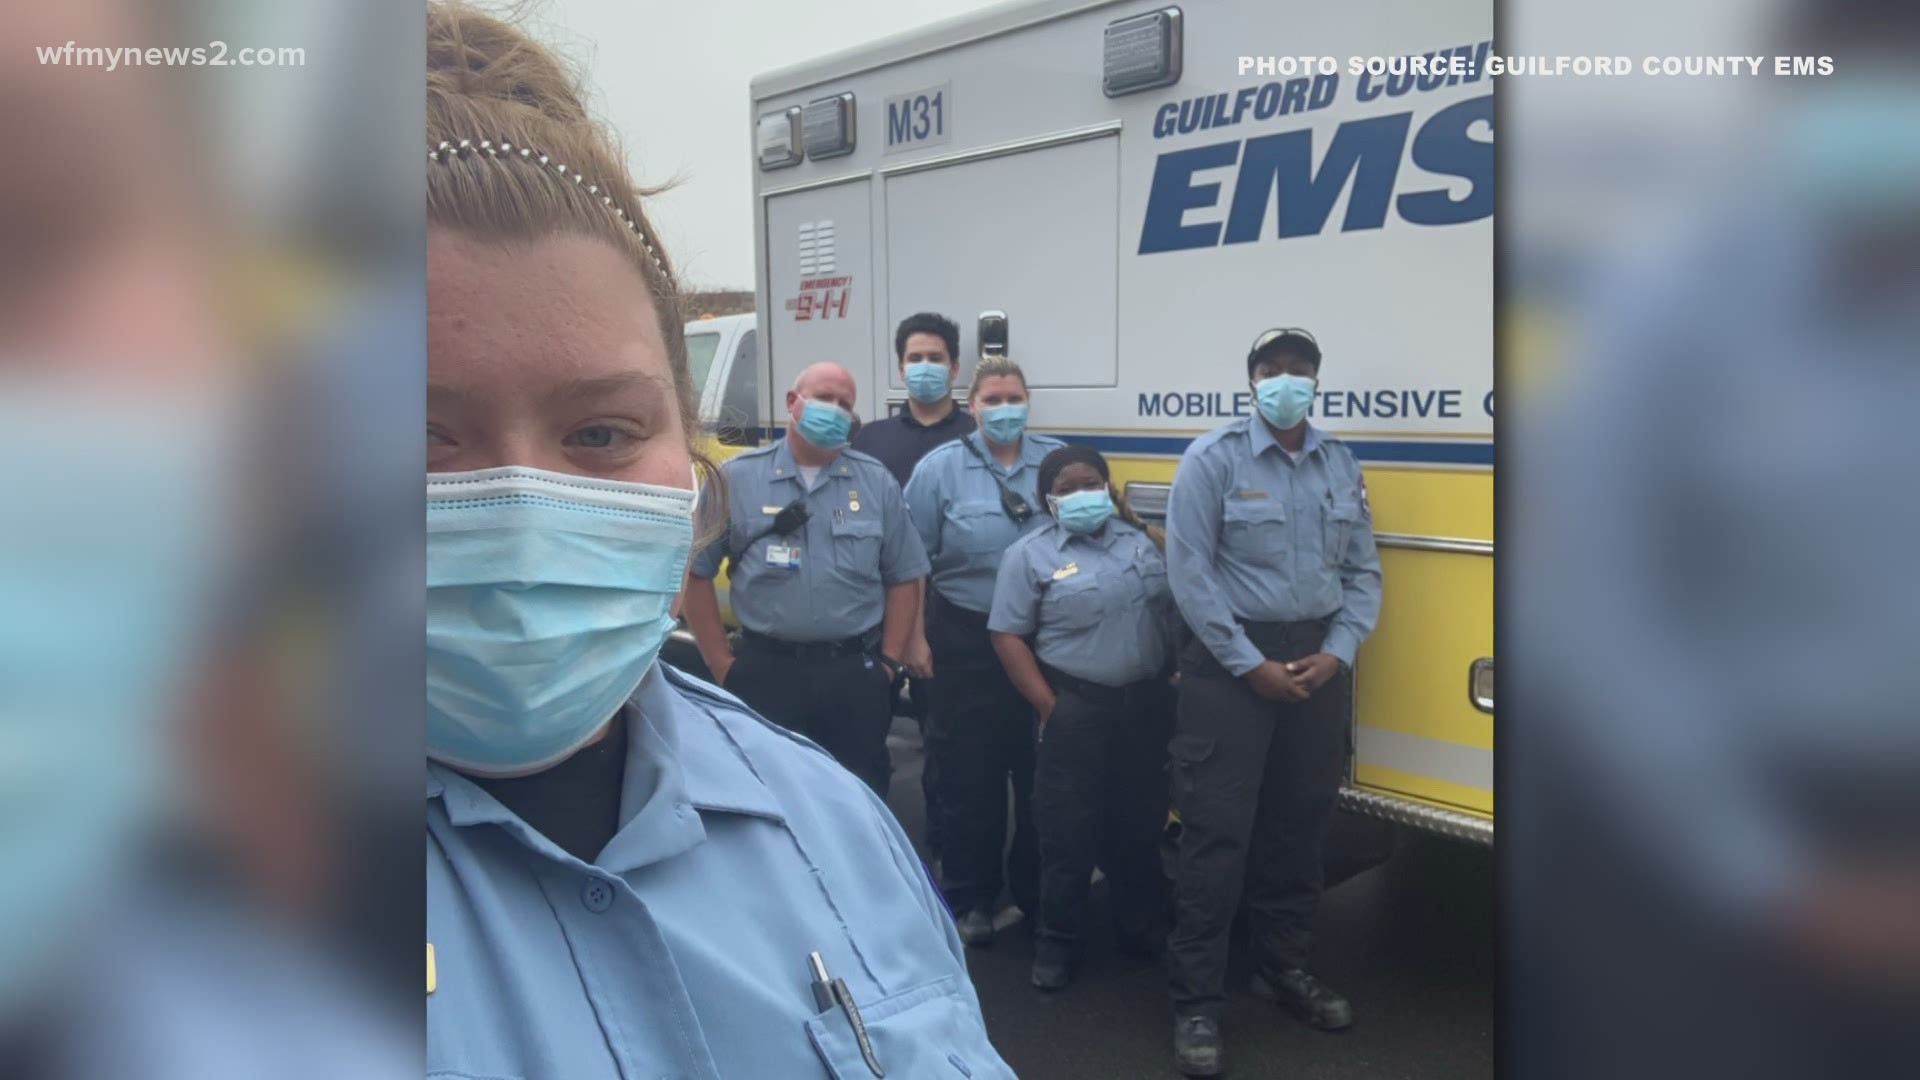 "It's hard sometimes being away from your family, but when you get to be here to help others in the community, it makes up for it," said one EMS worker.